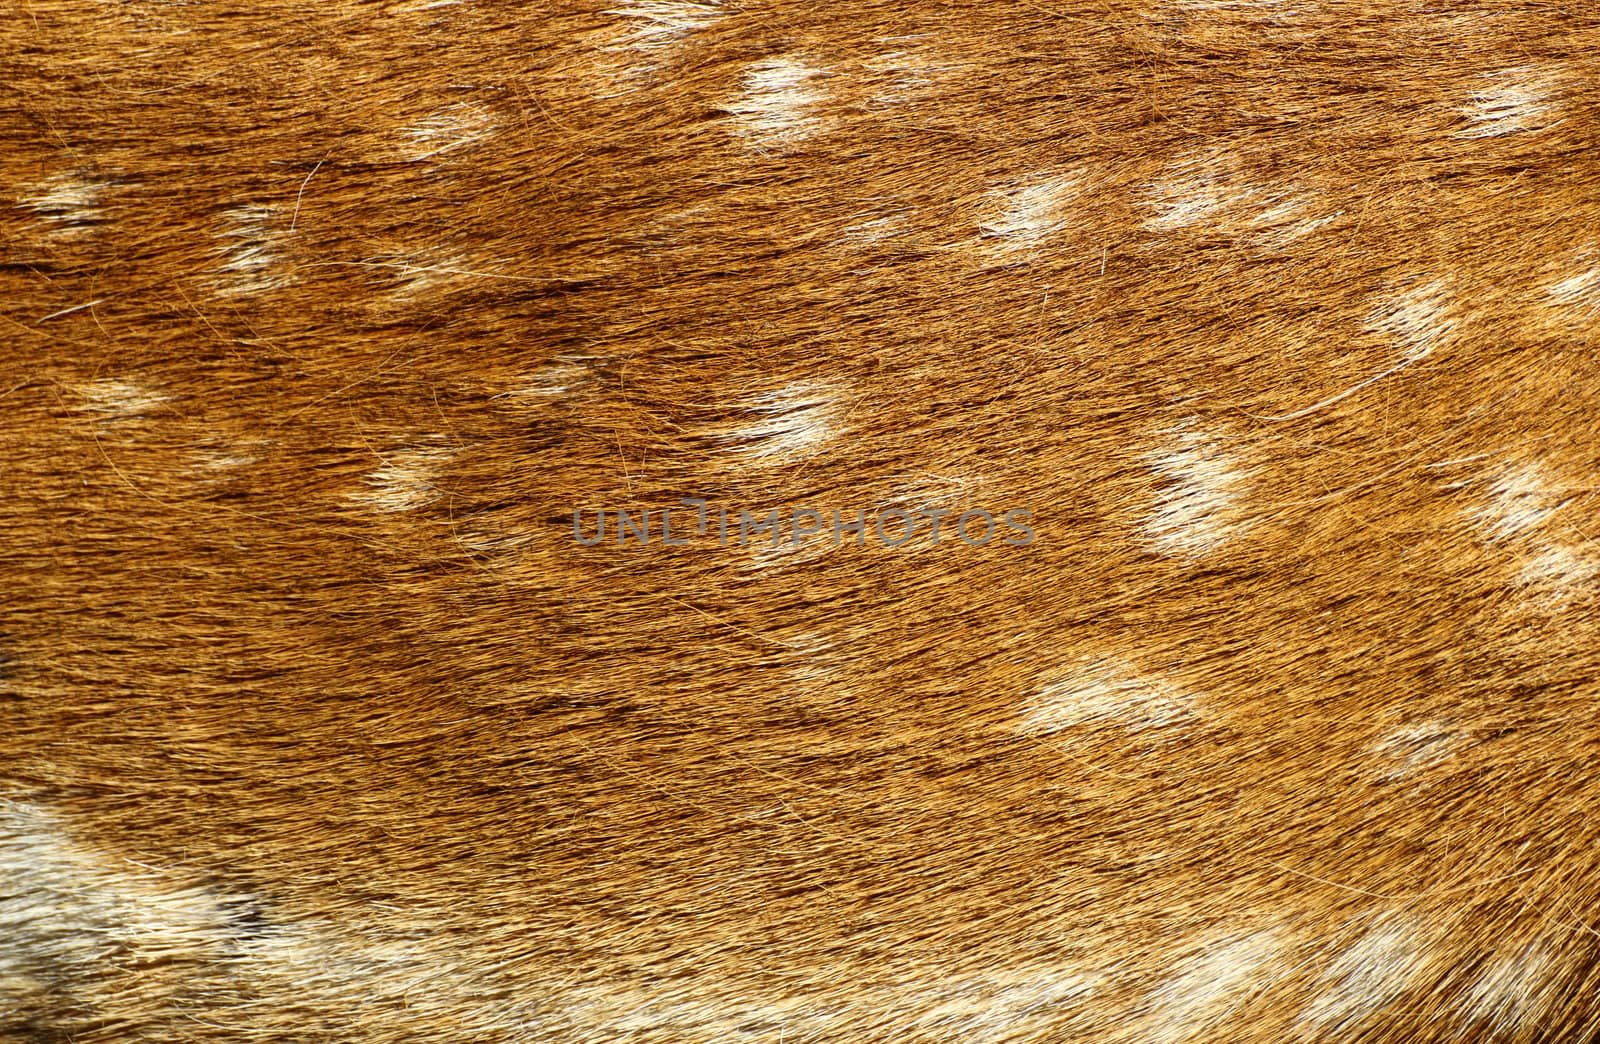 fallow deer fur pattern with many white spots